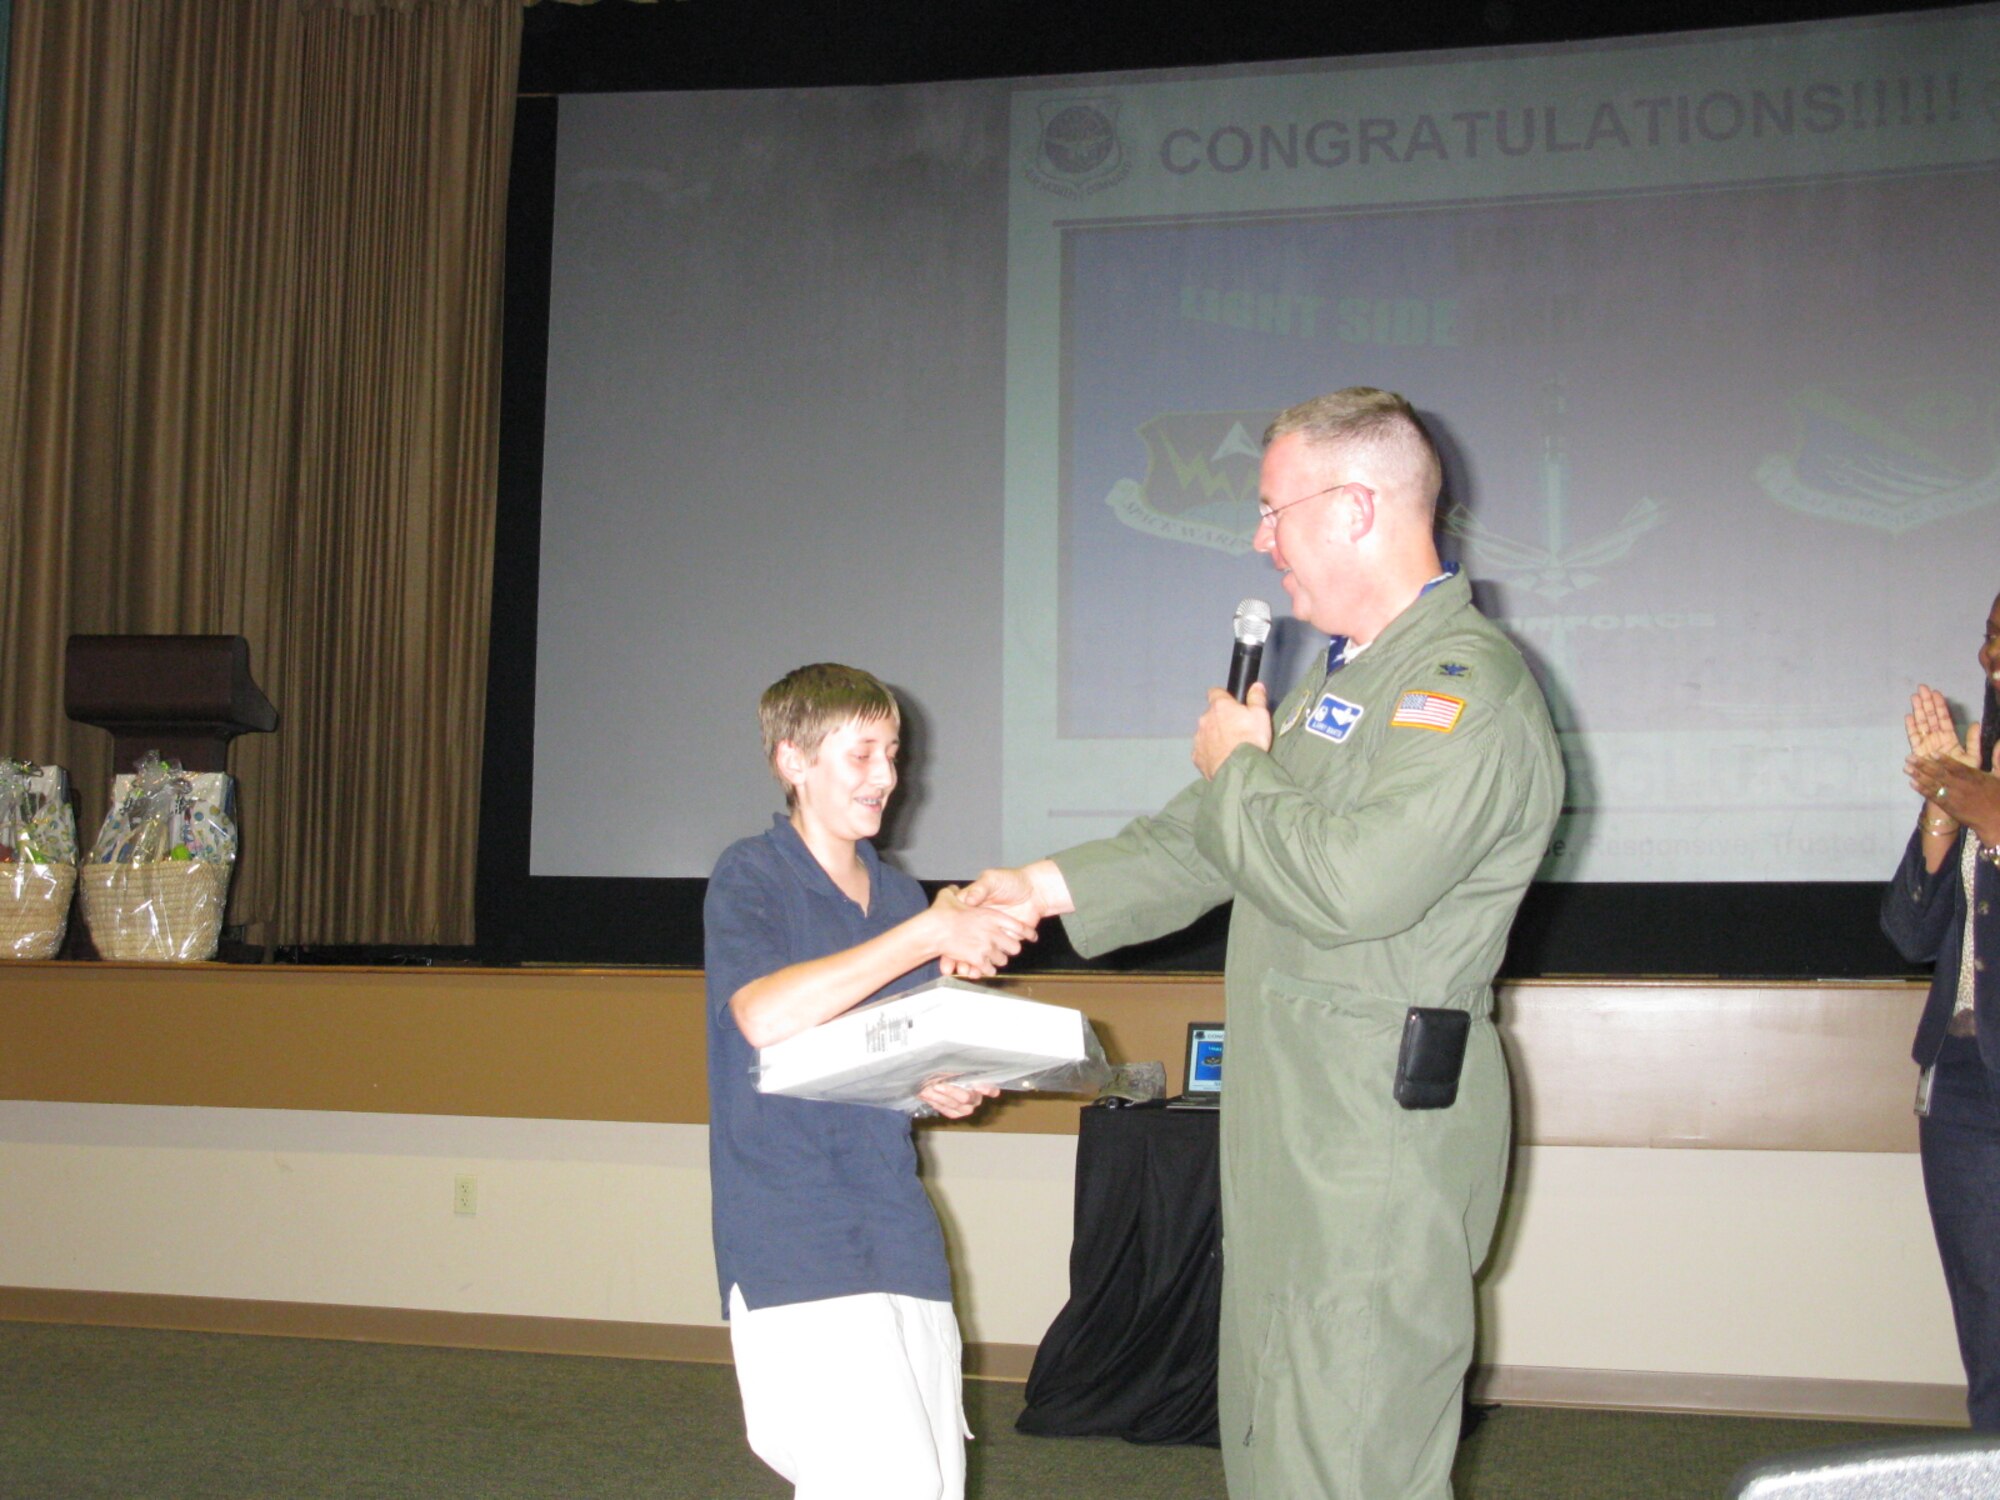 Col. Lawrence Martin, the commander of the 6th Air Mobility Wing, presented the MyAirForceLife.com T-shirt competition award to Nick Berglund at his quarterly town hall meeting in a packed base theater.